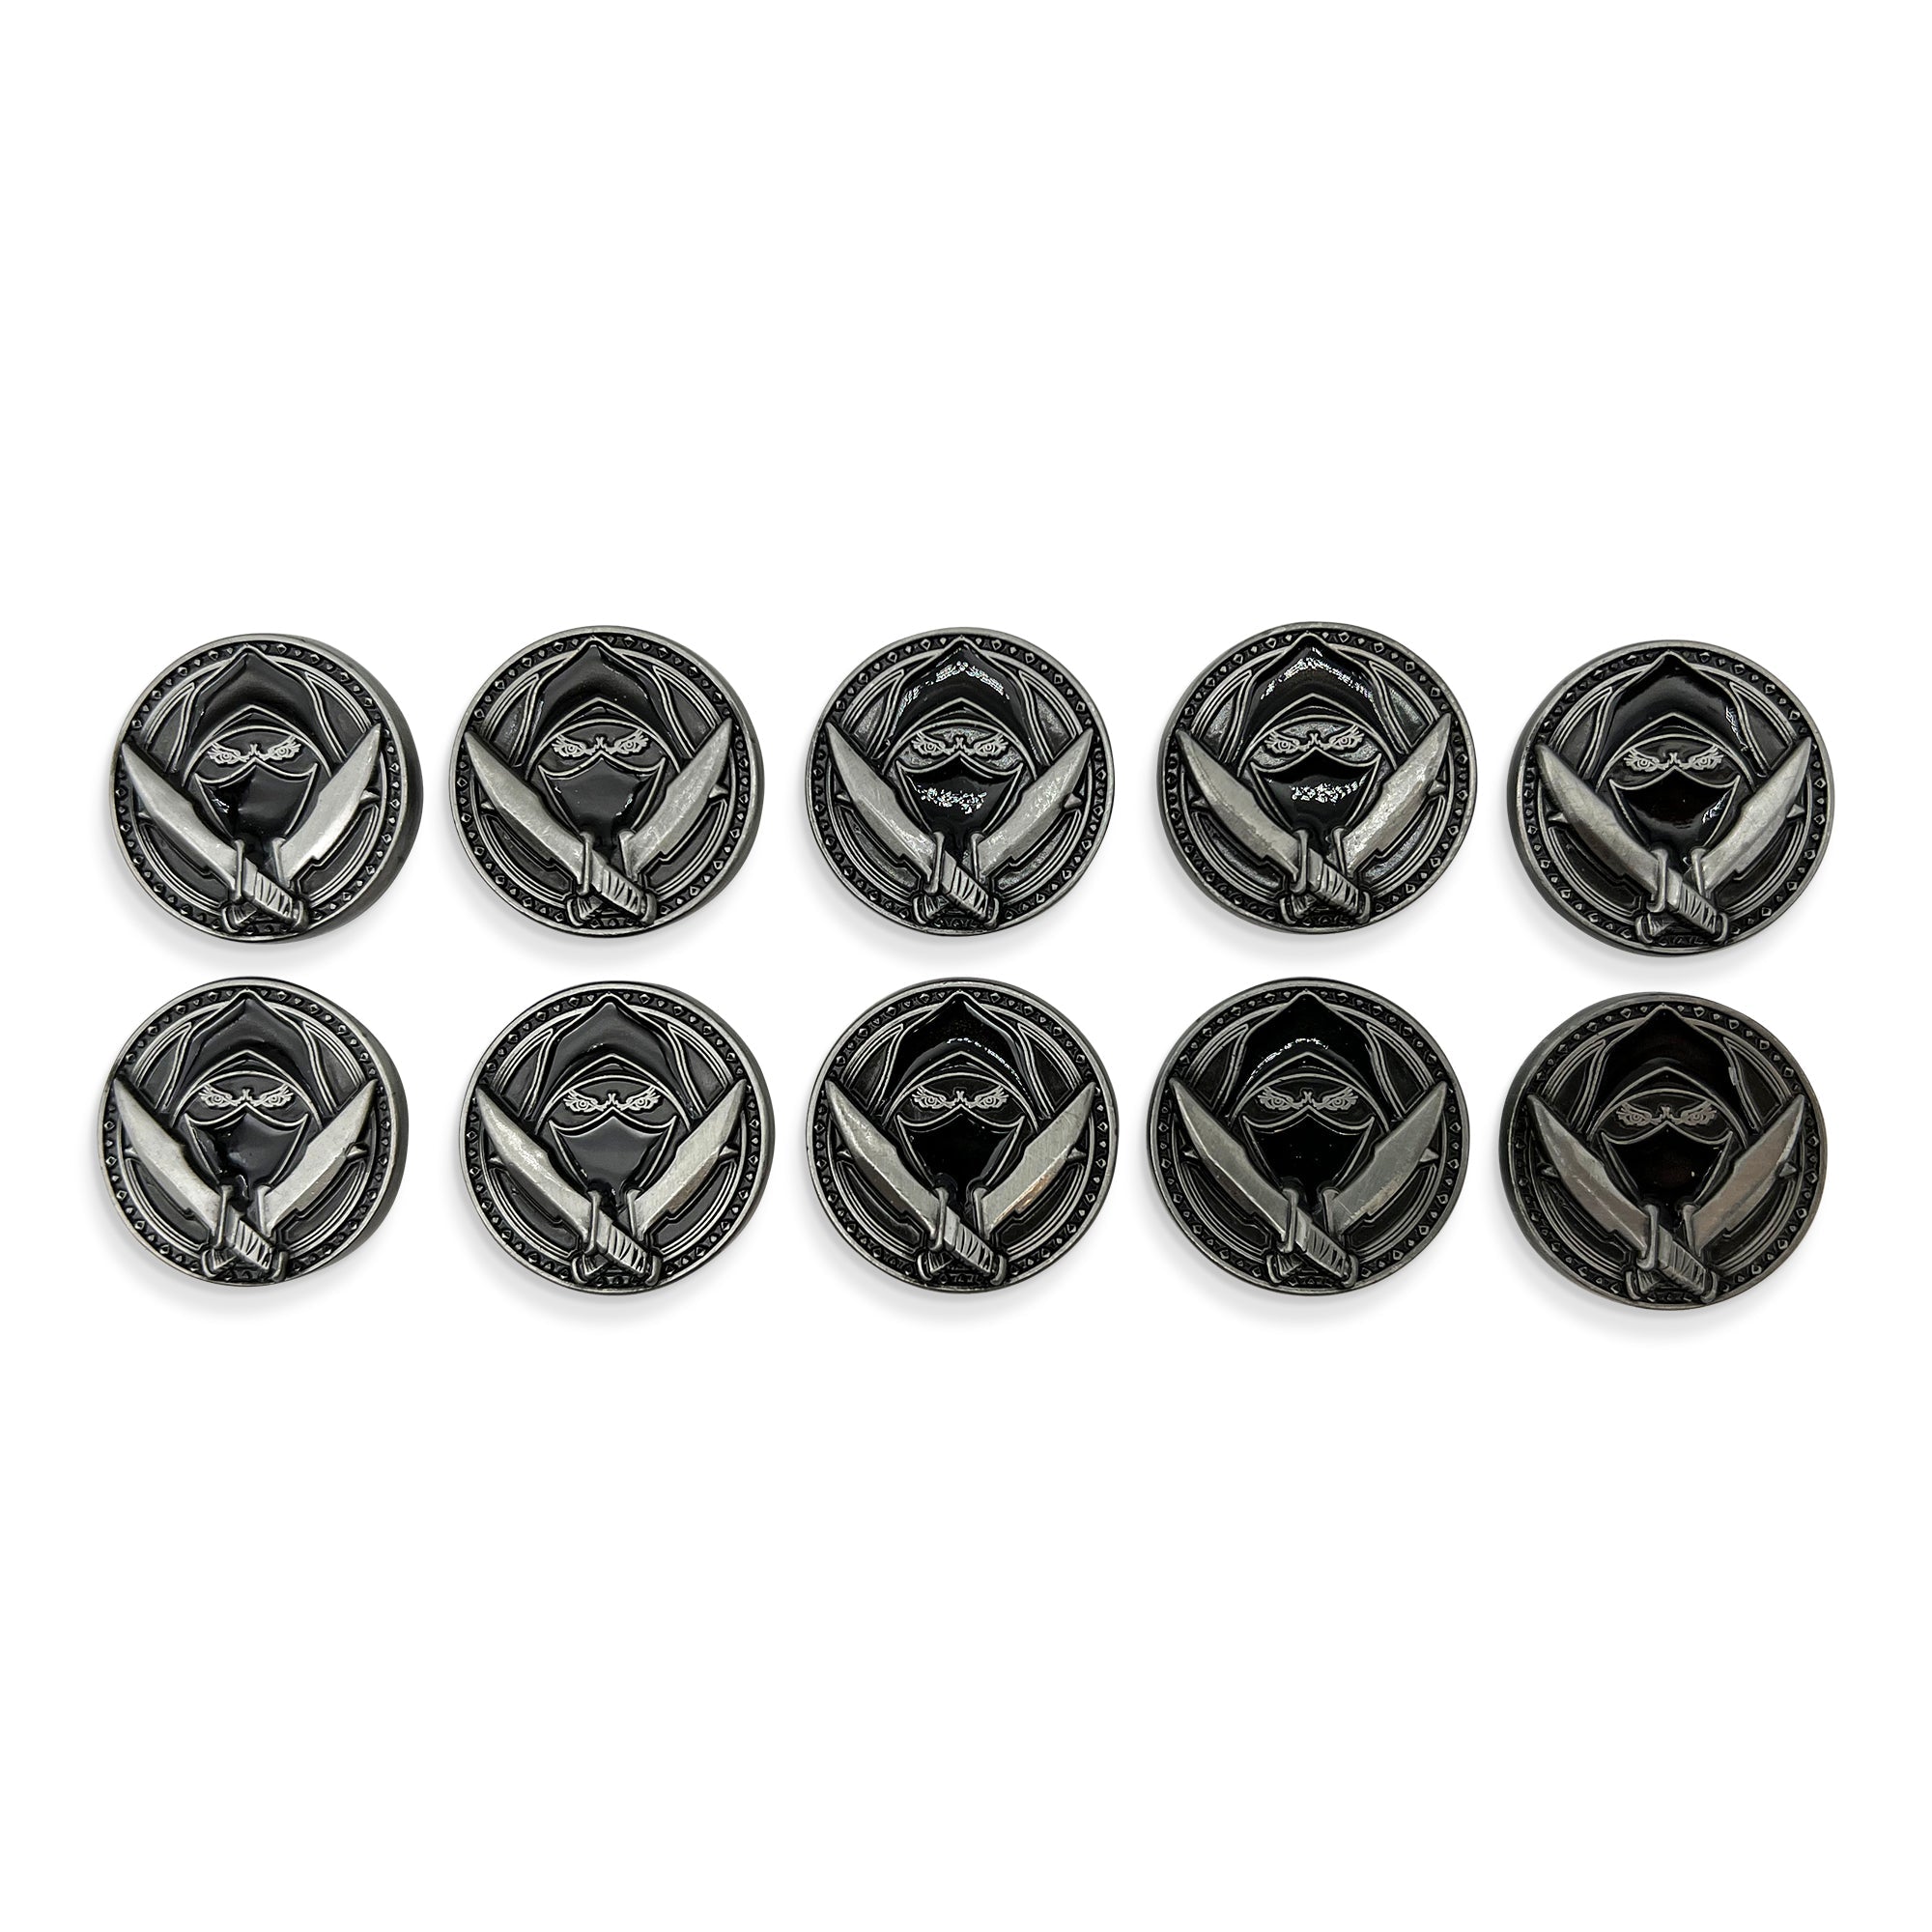 Profession Coins - Rogue Metal Coins Set of 10 - NOR 03415